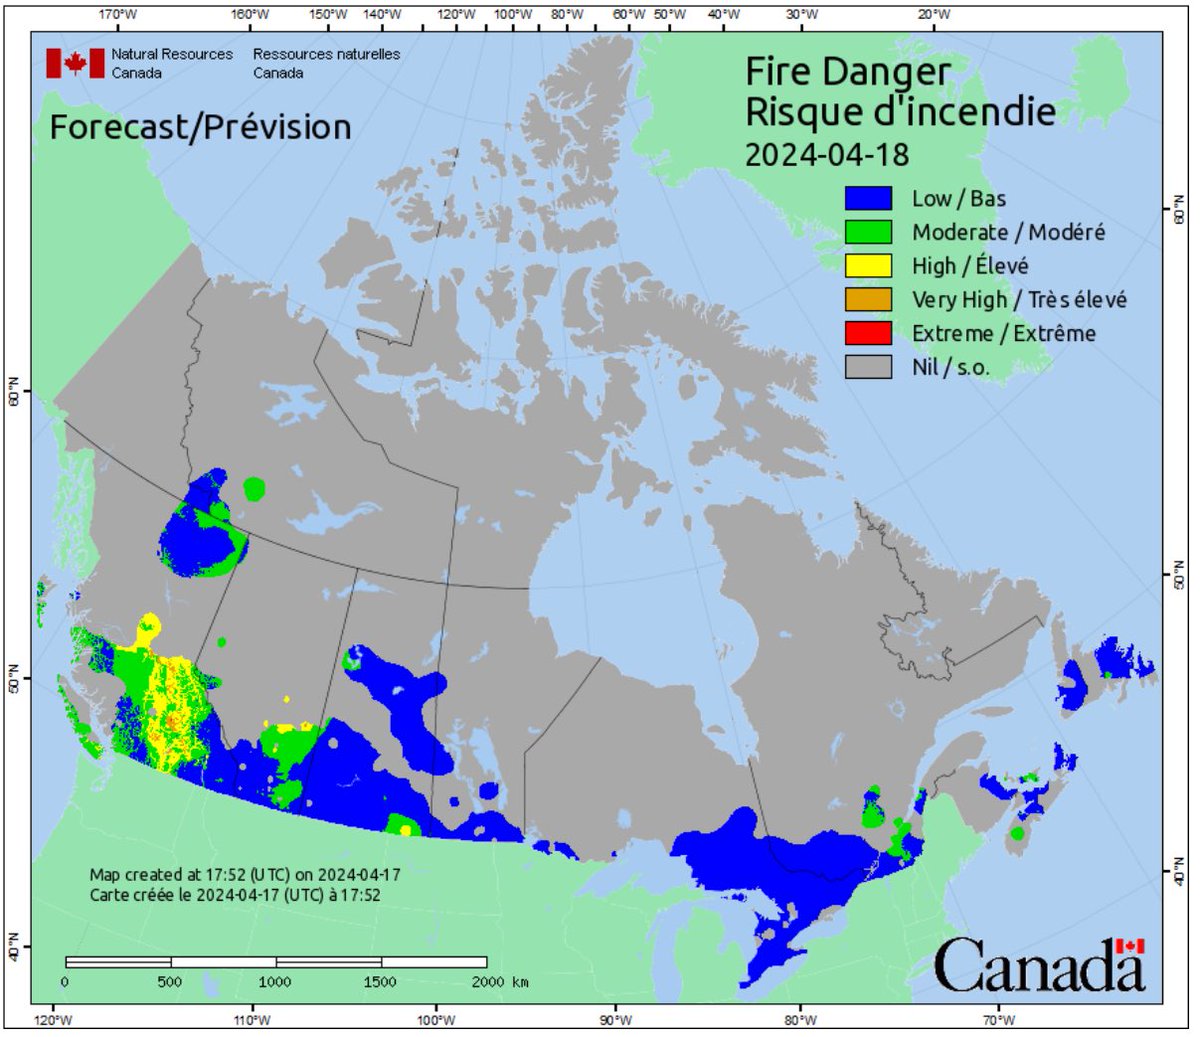 Remember this map, because in AB we are experiencing a rare moment of “low risk” in terms of Fire Danger. These ratings are based on 3 criteria: 1. How easy it would be for a wildfire to ignite 2. How difficult it would be to extinguish a wildfire 3. Potential level of damage